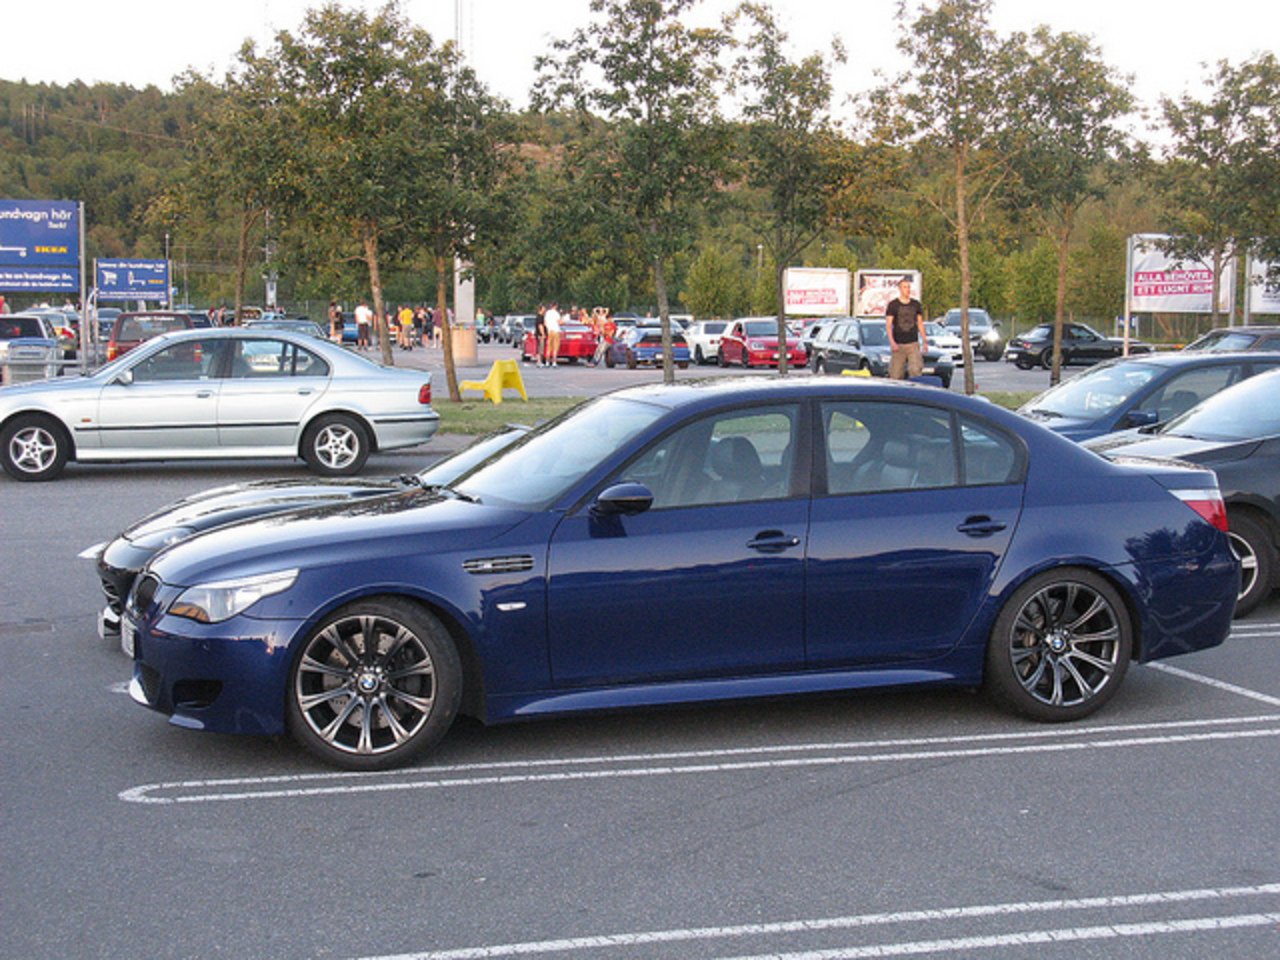 Flickr: The BMW E60 (5 Series) Pool